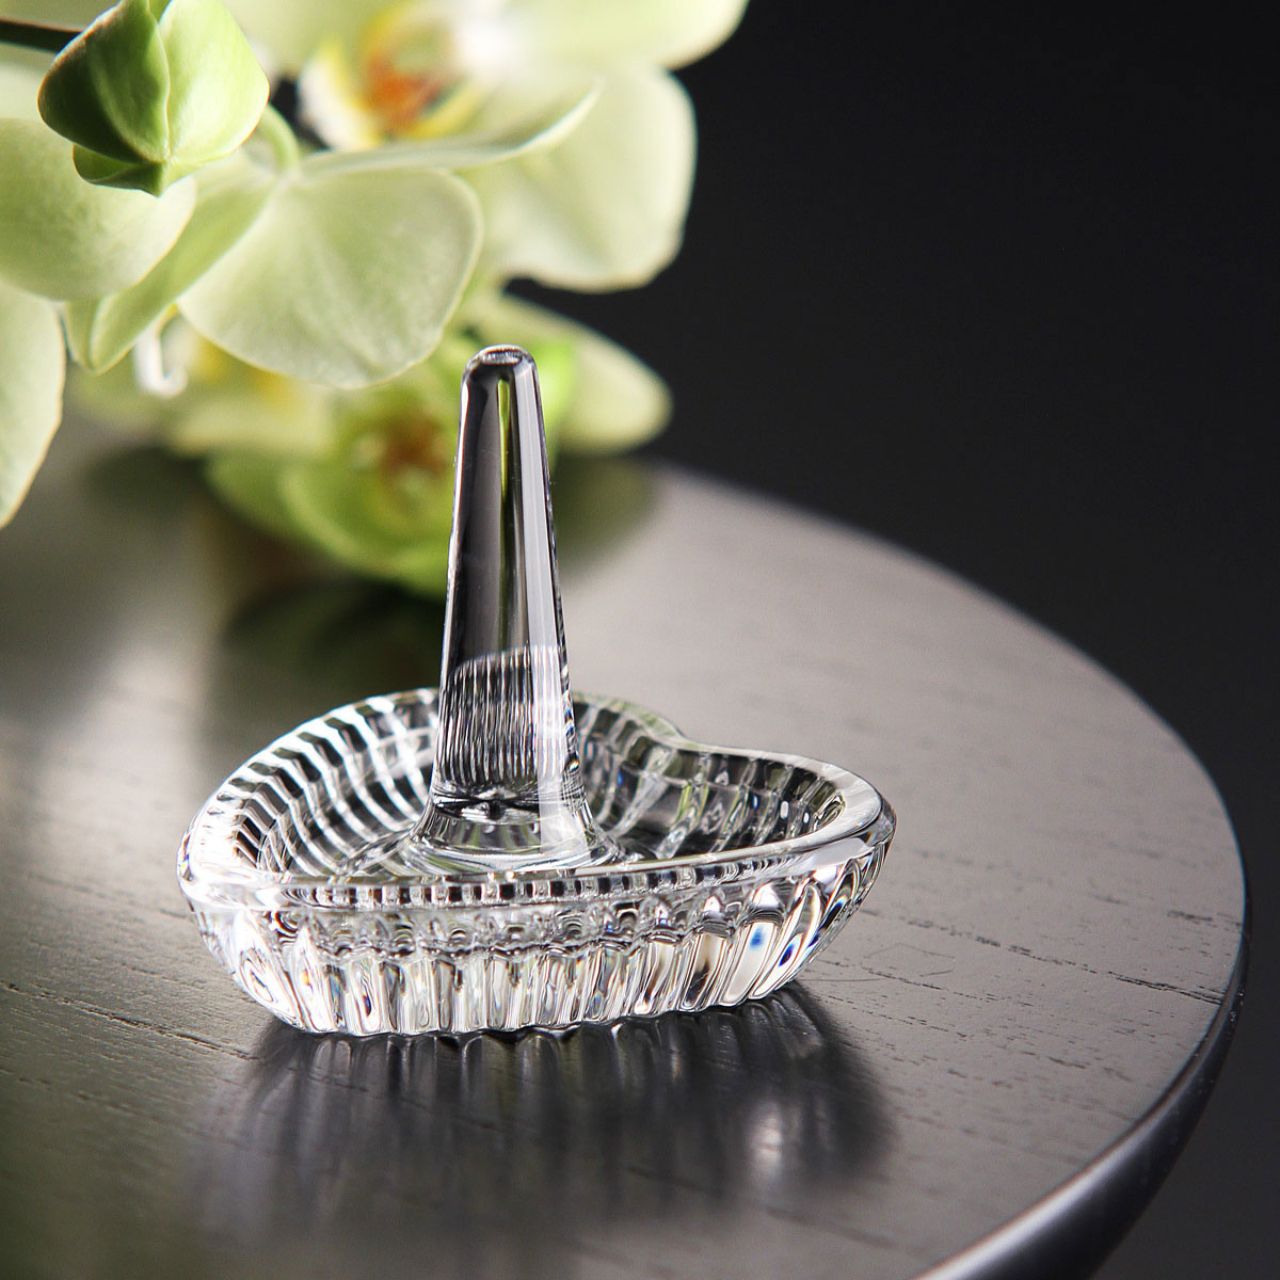 Waterford Crystal Heart Ring Holder  Keep precious jewelry close to your heart. Radiating from the center, the clean vertical cut of Waterford's Heart Ring Holder creates a stunning focal point while keeping your rings safe and sound.